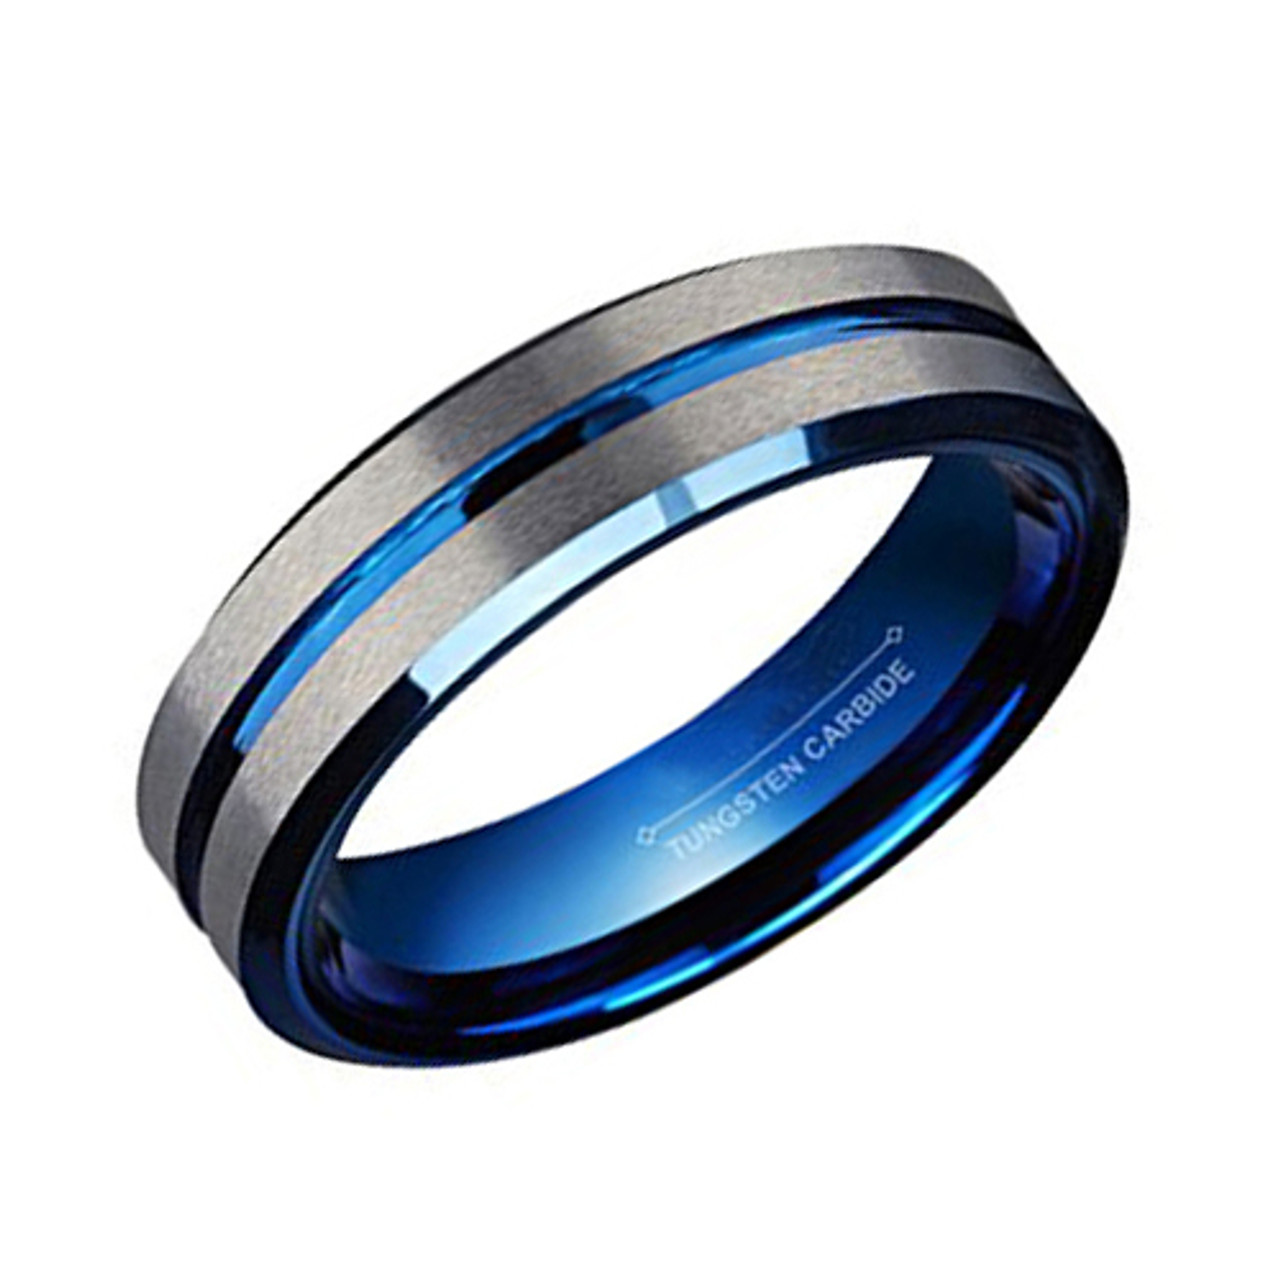 (6mm) Unisex, Women's or Men's Gray and Blue Tungsten Carbide Wedding Ring Band. Grooved with Matte Finish and Beveled Edges.